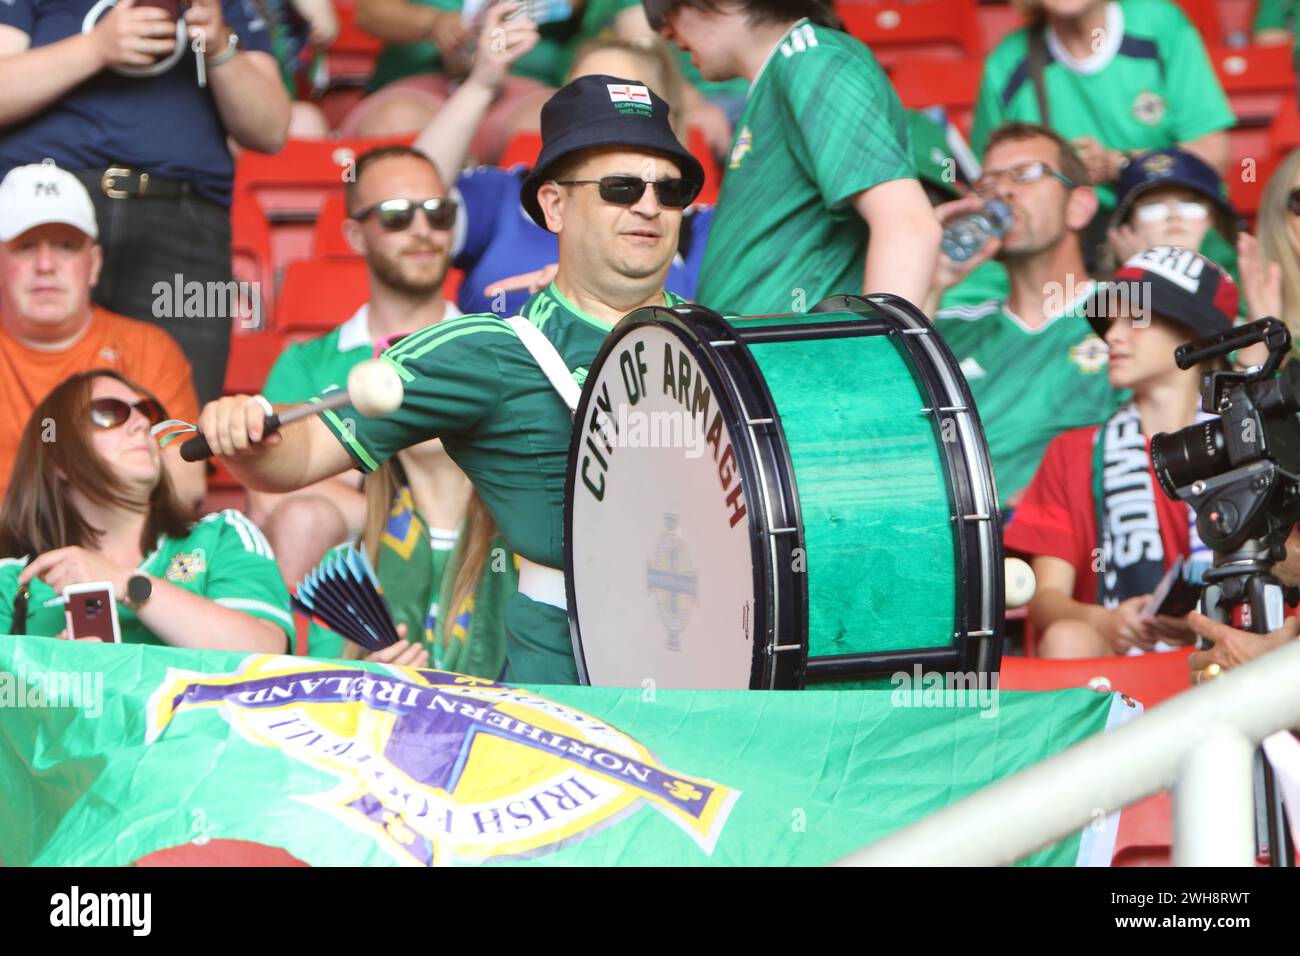 City of Armagh Drum NISC England v Northern Ireland UEFA Womens Euro 15 juillet 2022 St Marys Stadium Southampton Banque D'Images